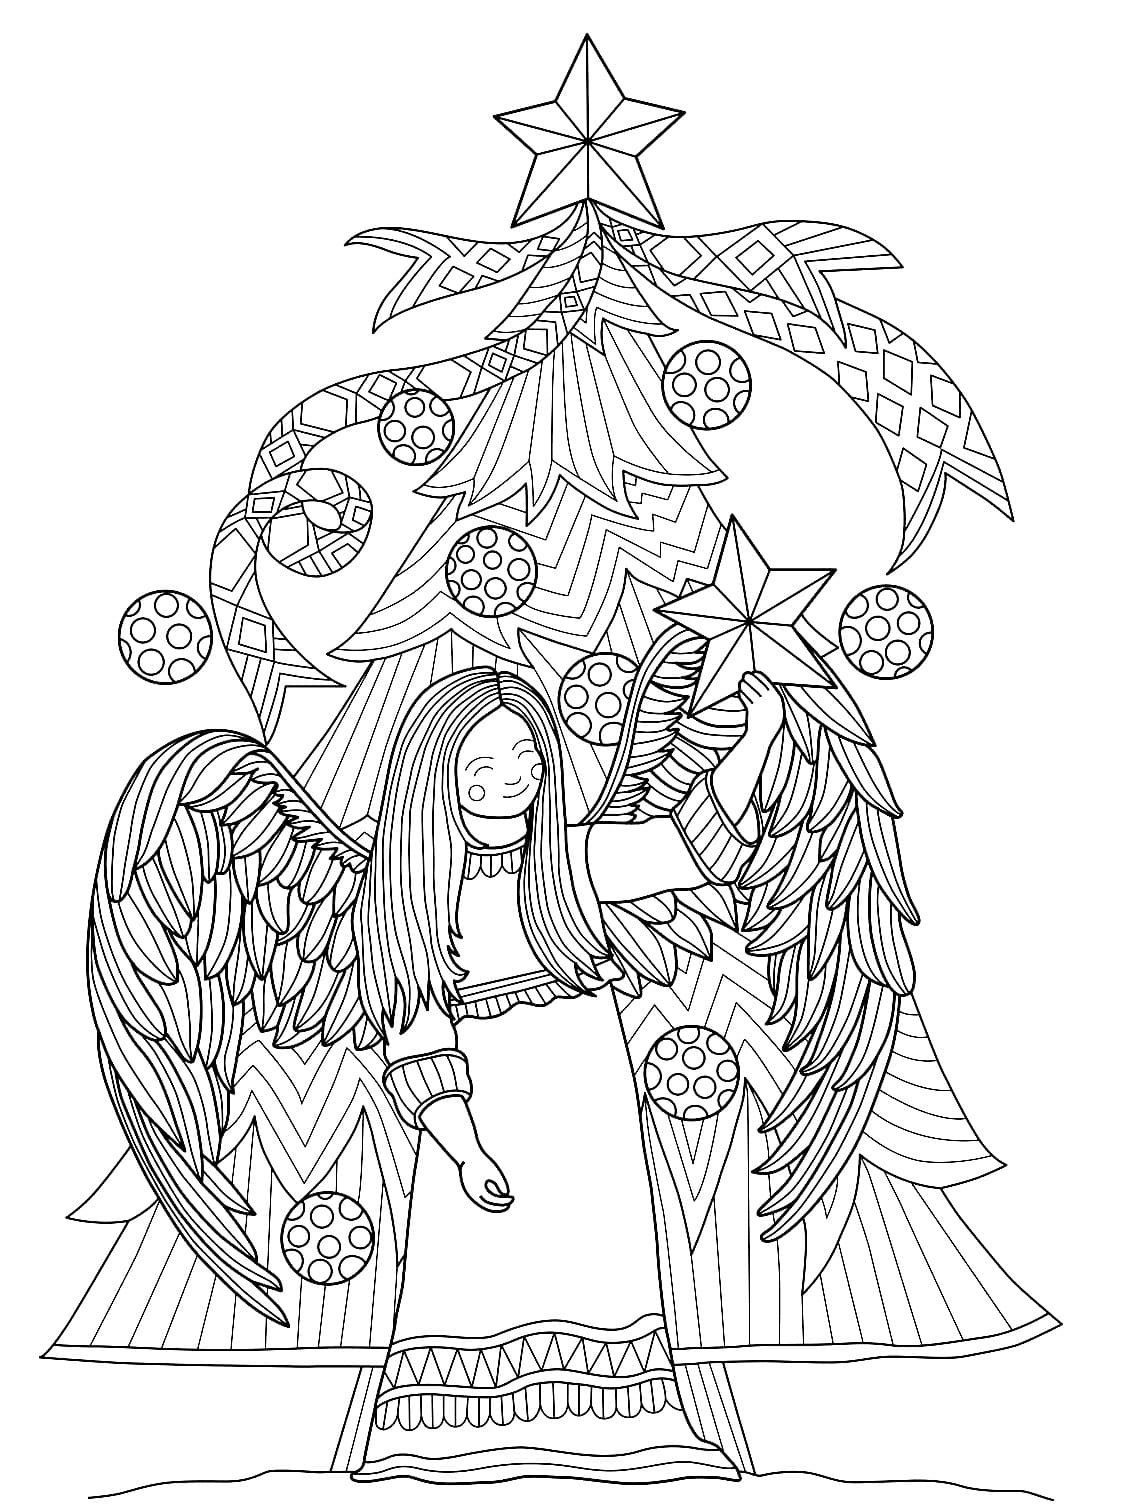 Jolie Ange coloring page